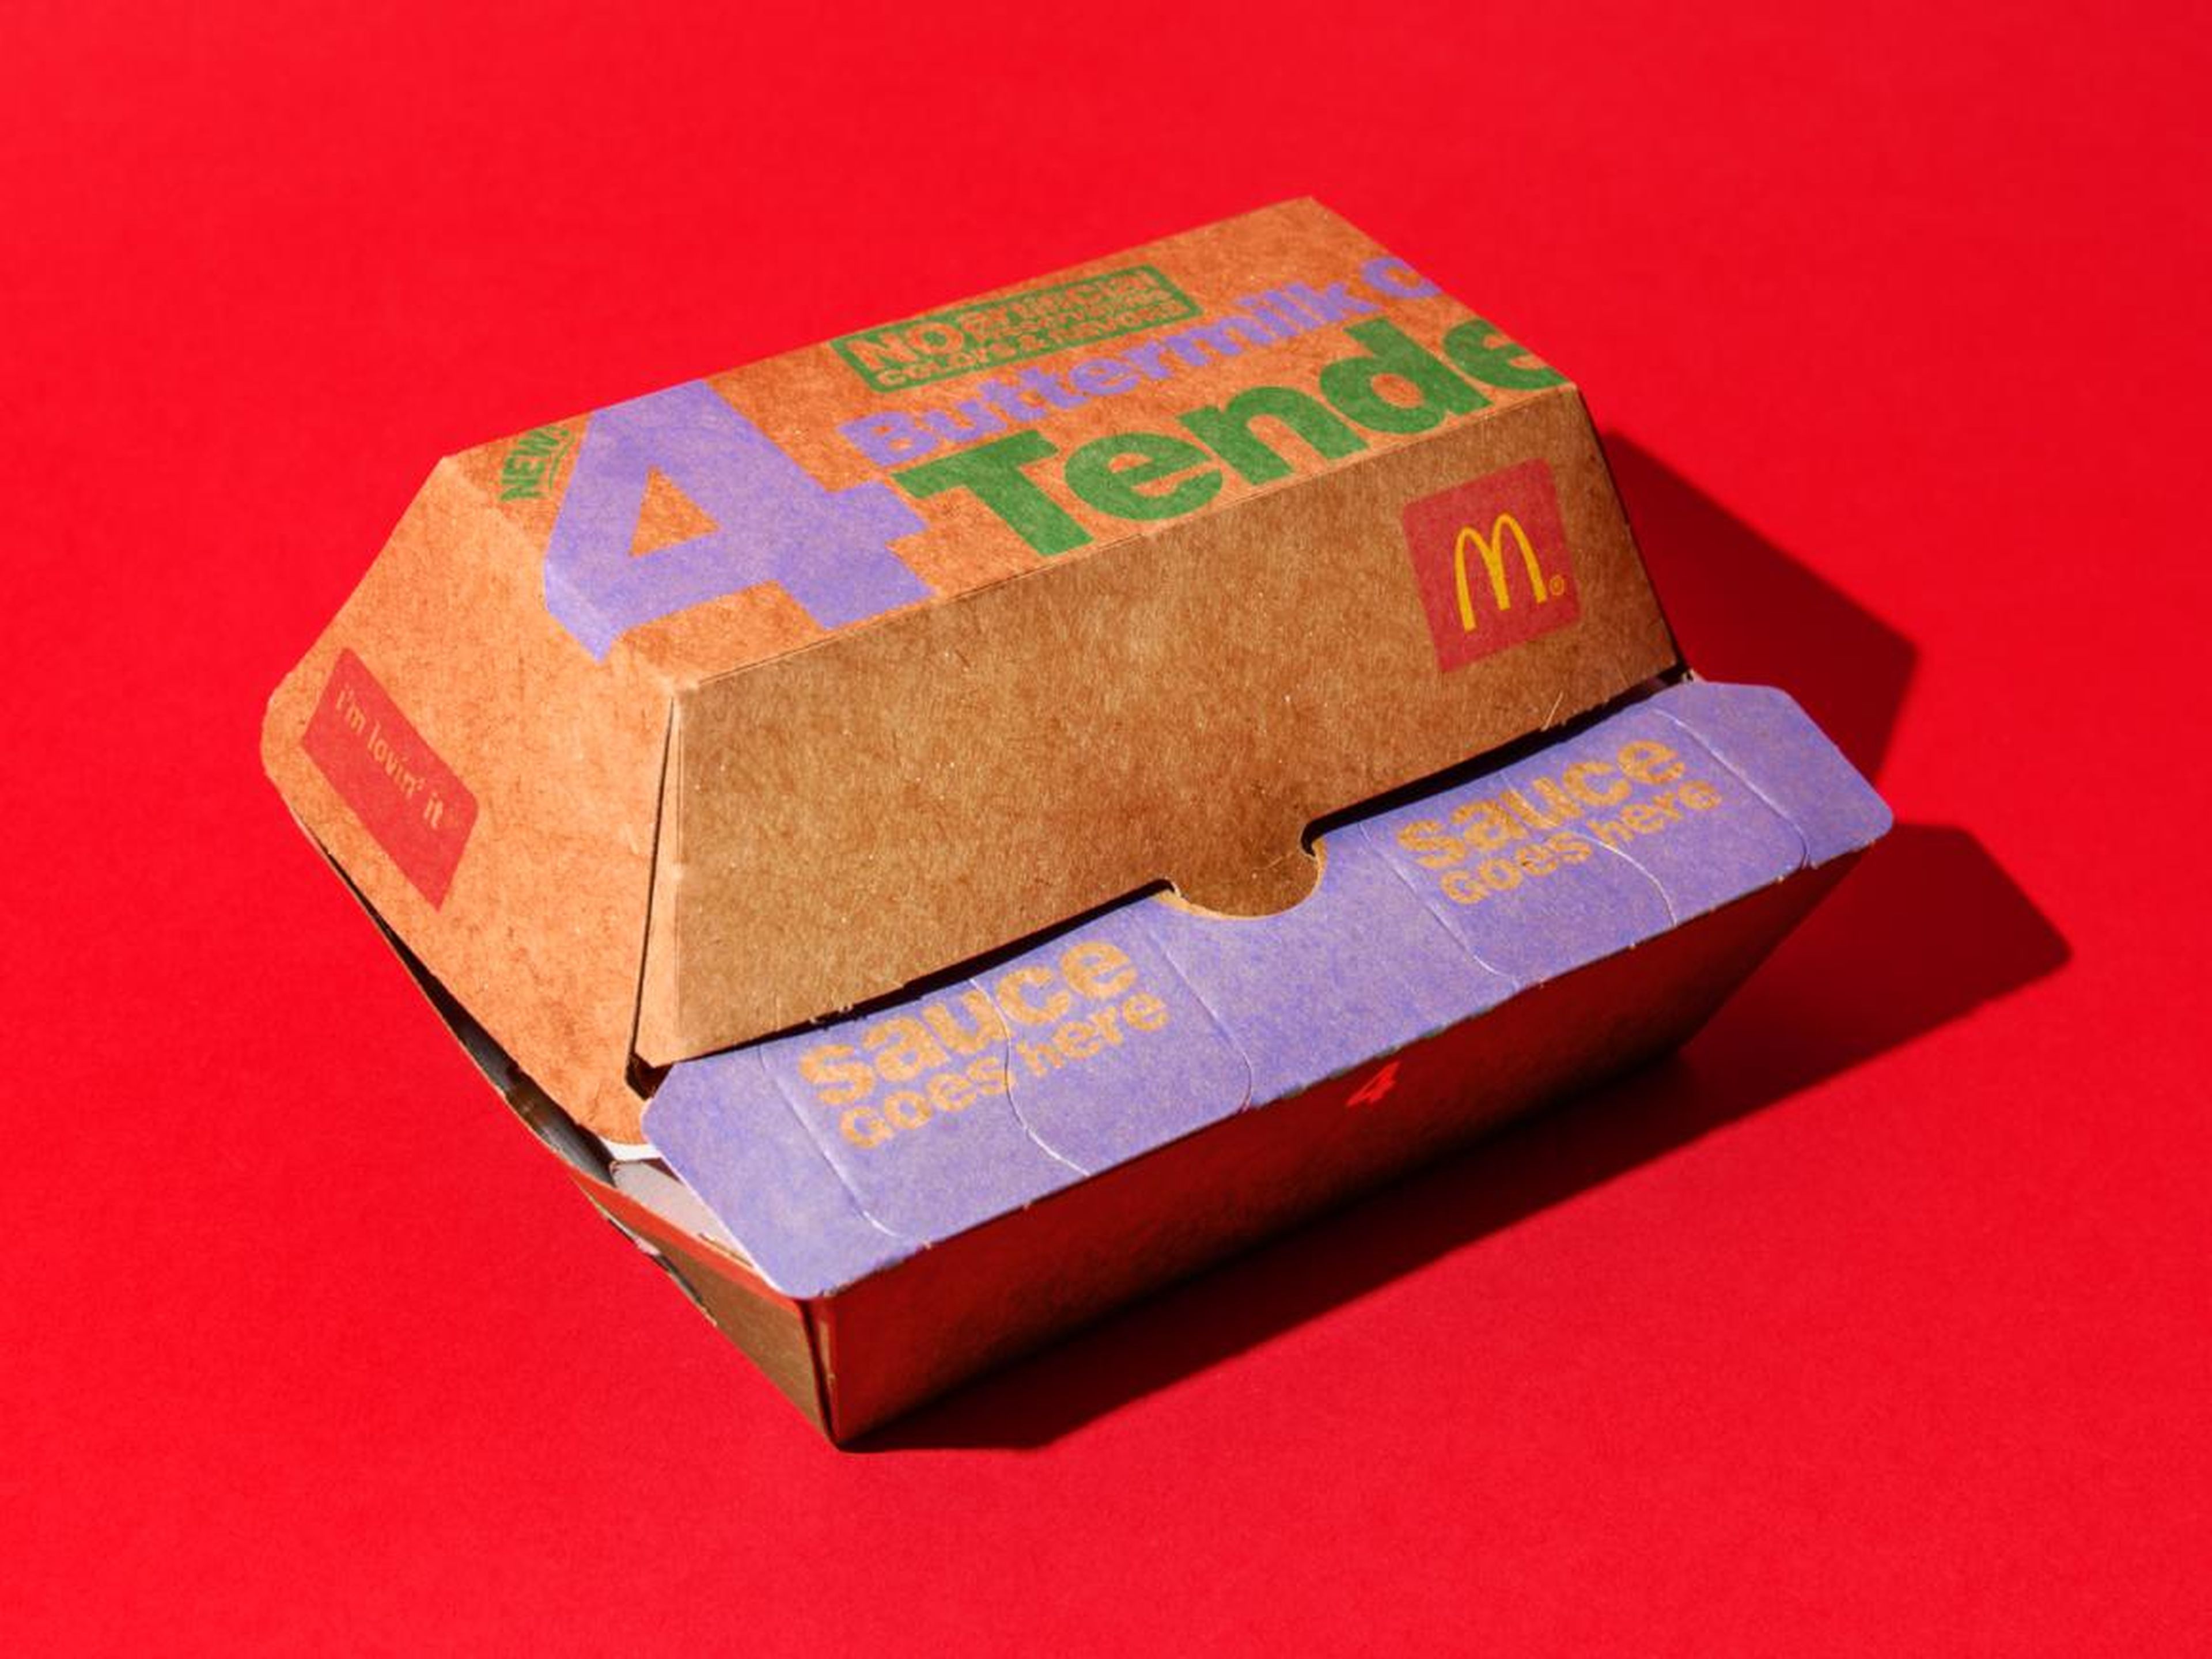 The new tenders from McDonald's came in a unique box.